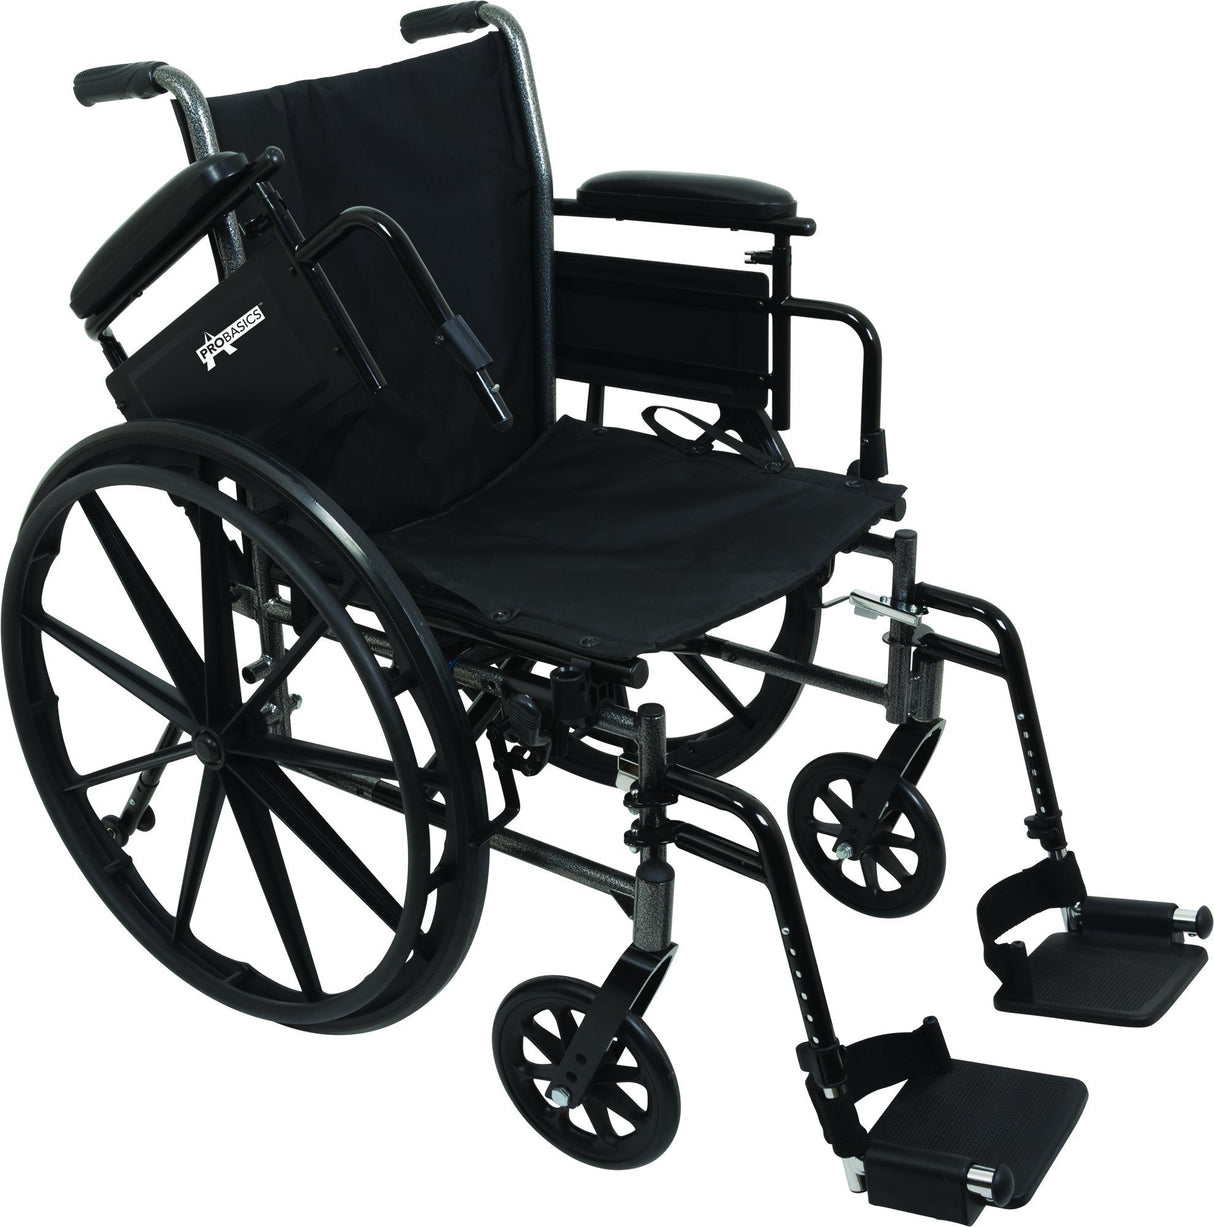 Image of ProBasics K3 Lightweight Wheelchair with 18" x 16" Seat, Flip-Up Height Adj Desk Arms, Elevating Leg-rests